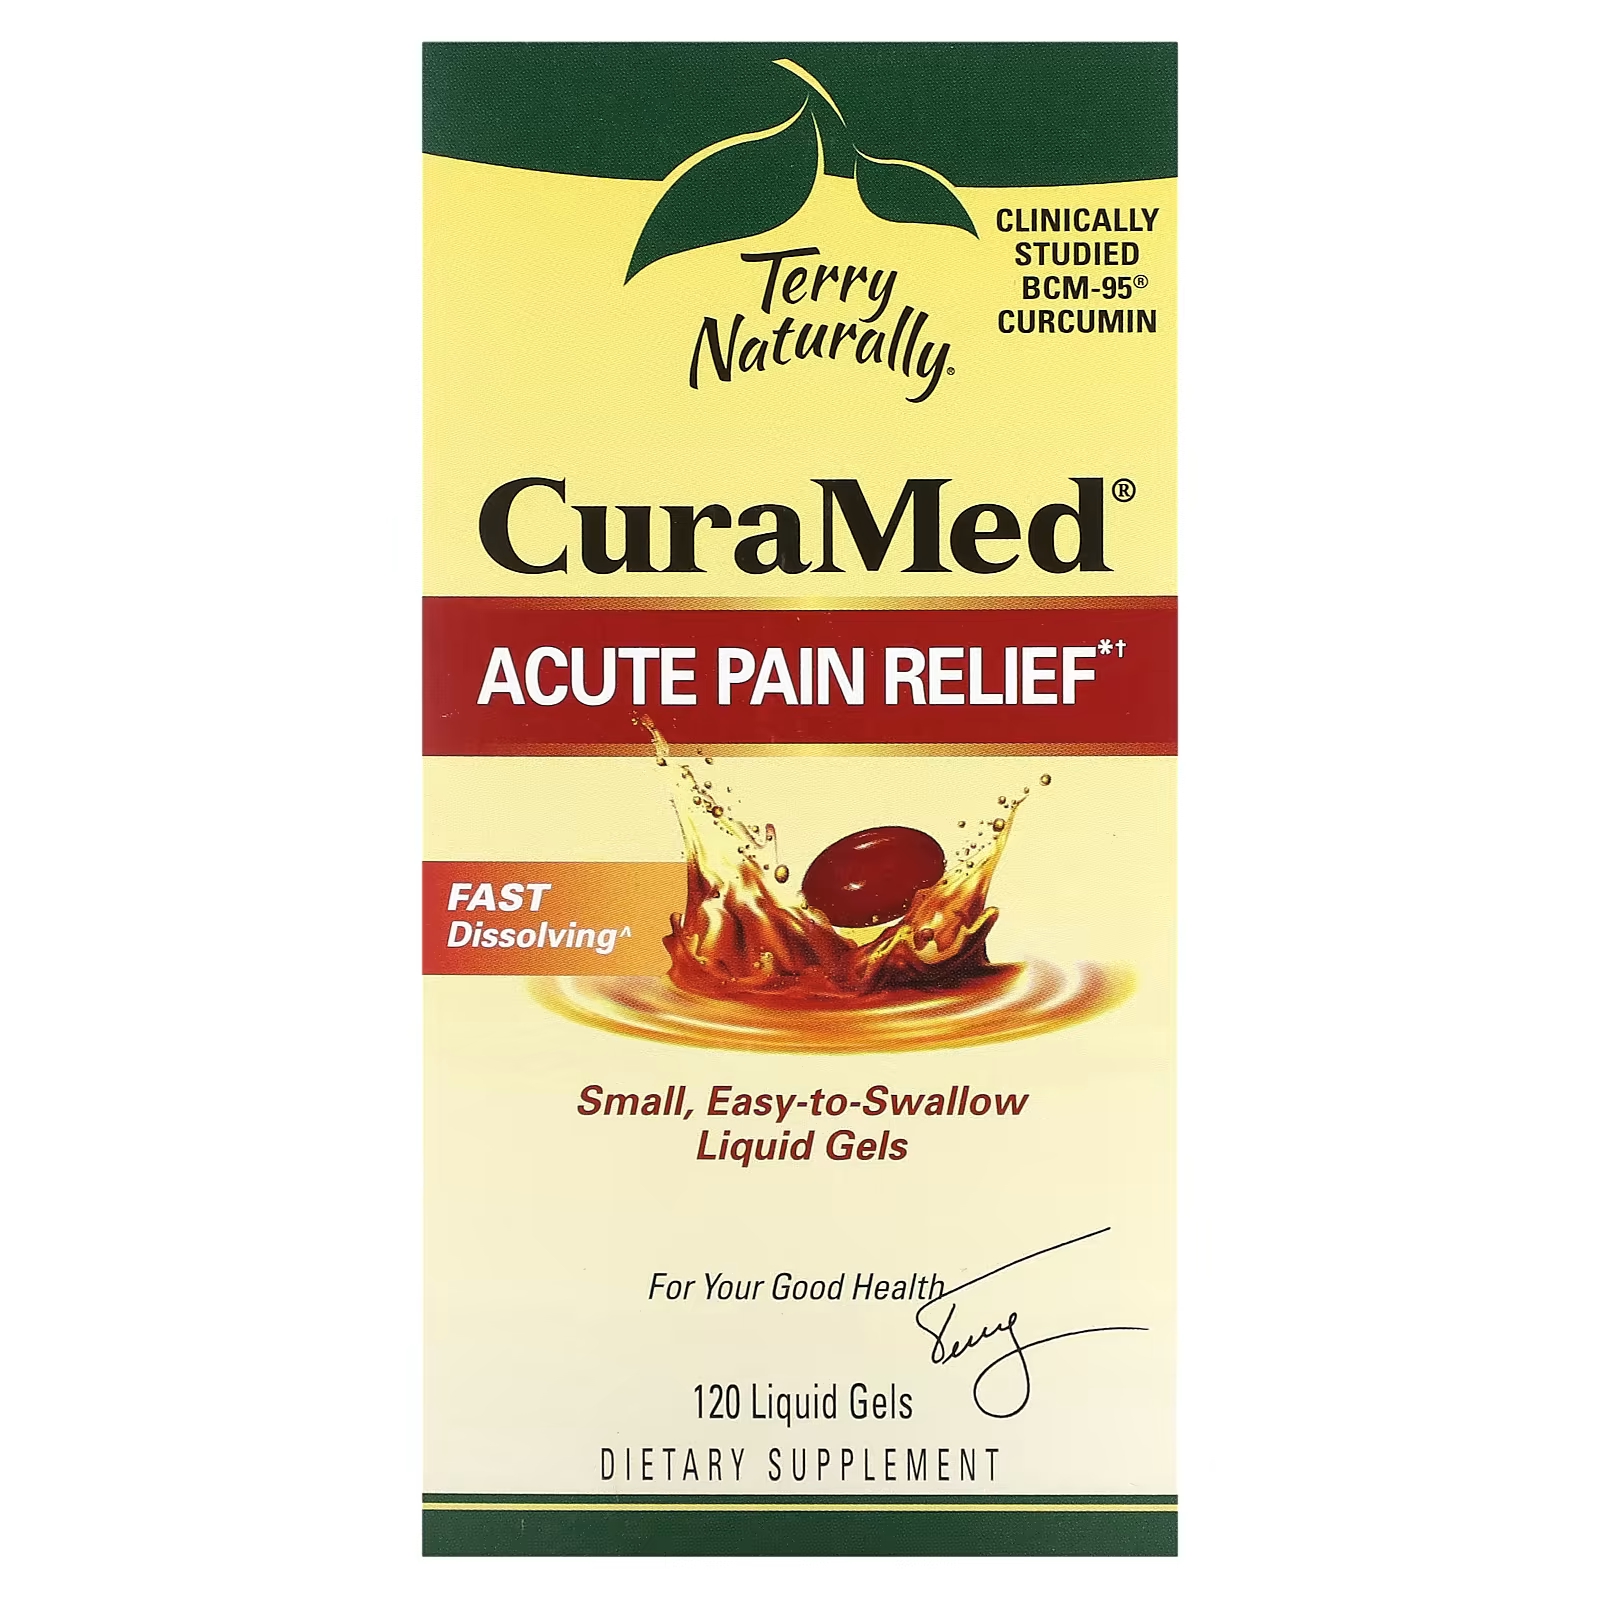 Средство от острой боли Terry Naturally CuraMed, 120 жидких гелей hot 80pcs tiger balm pain relief patch fast relief aches pains